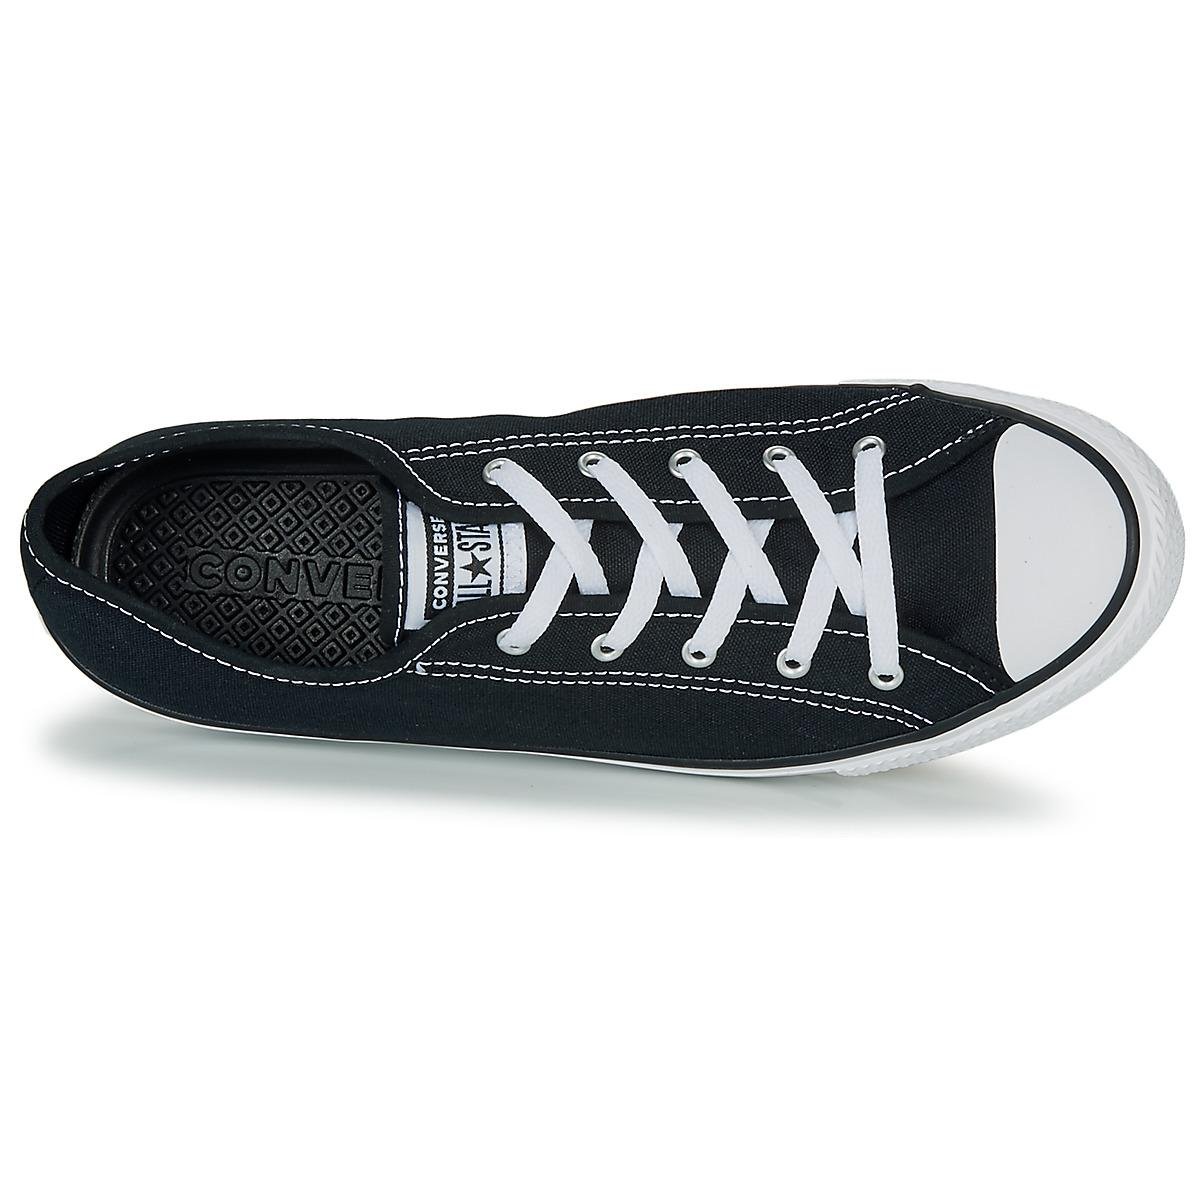 converse chuck taylor all star dainty trainers in black